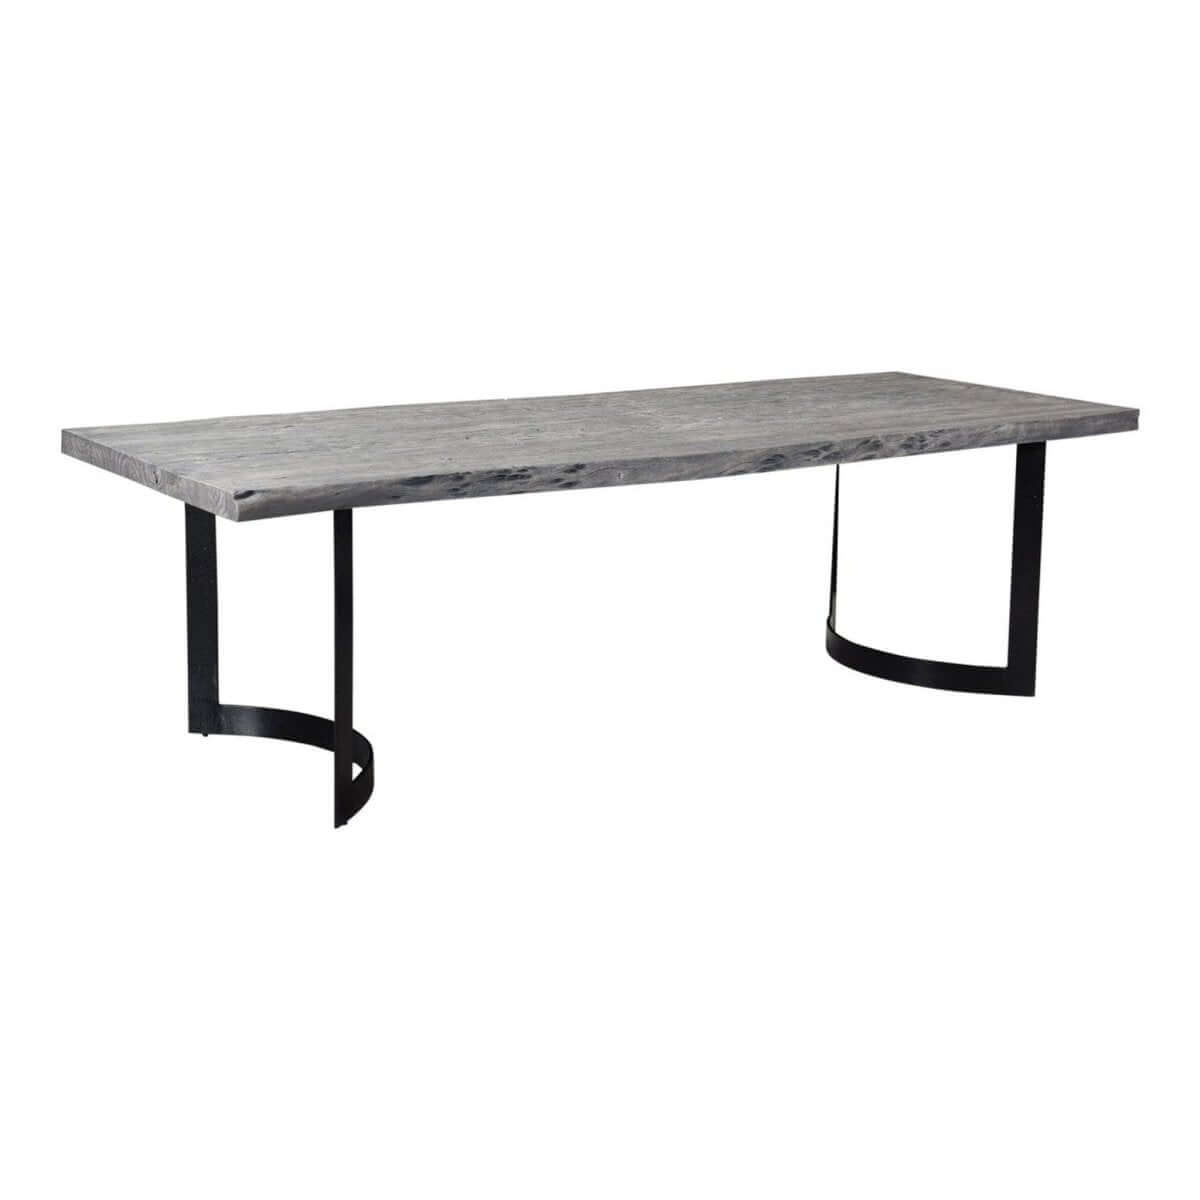 Moes Home Bent Dining Table Small - VE-1001-29-0 - Moe's Home - $3025.00